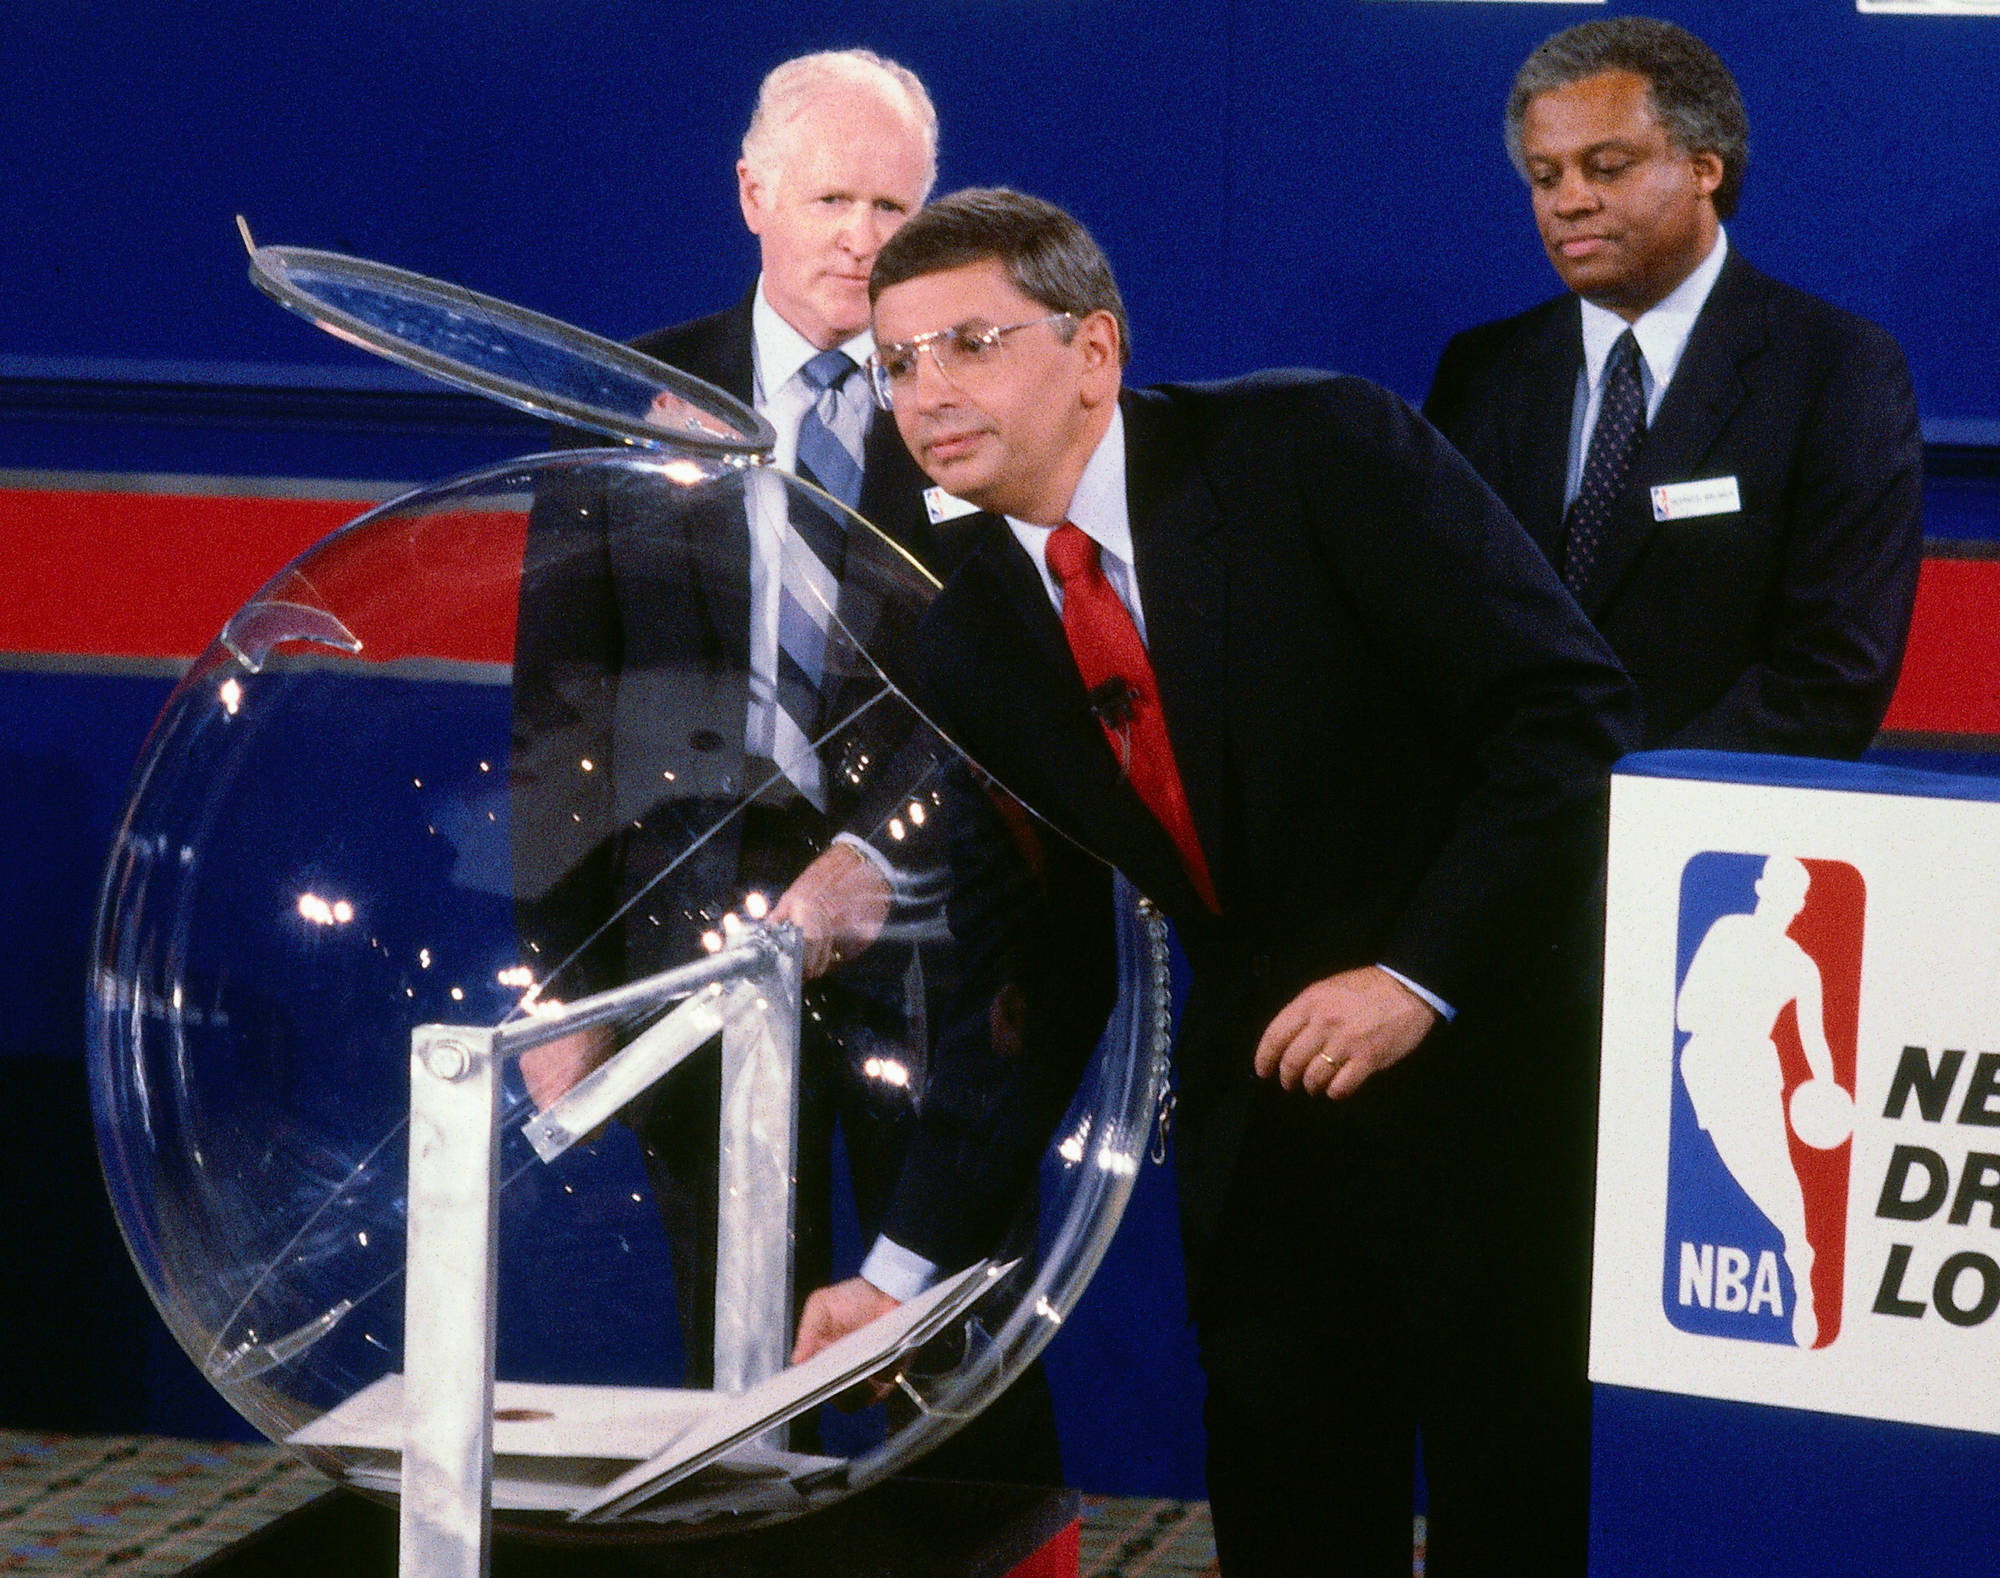 The Best Moments From The History Of The Nba Draft Lottery Yardbarker